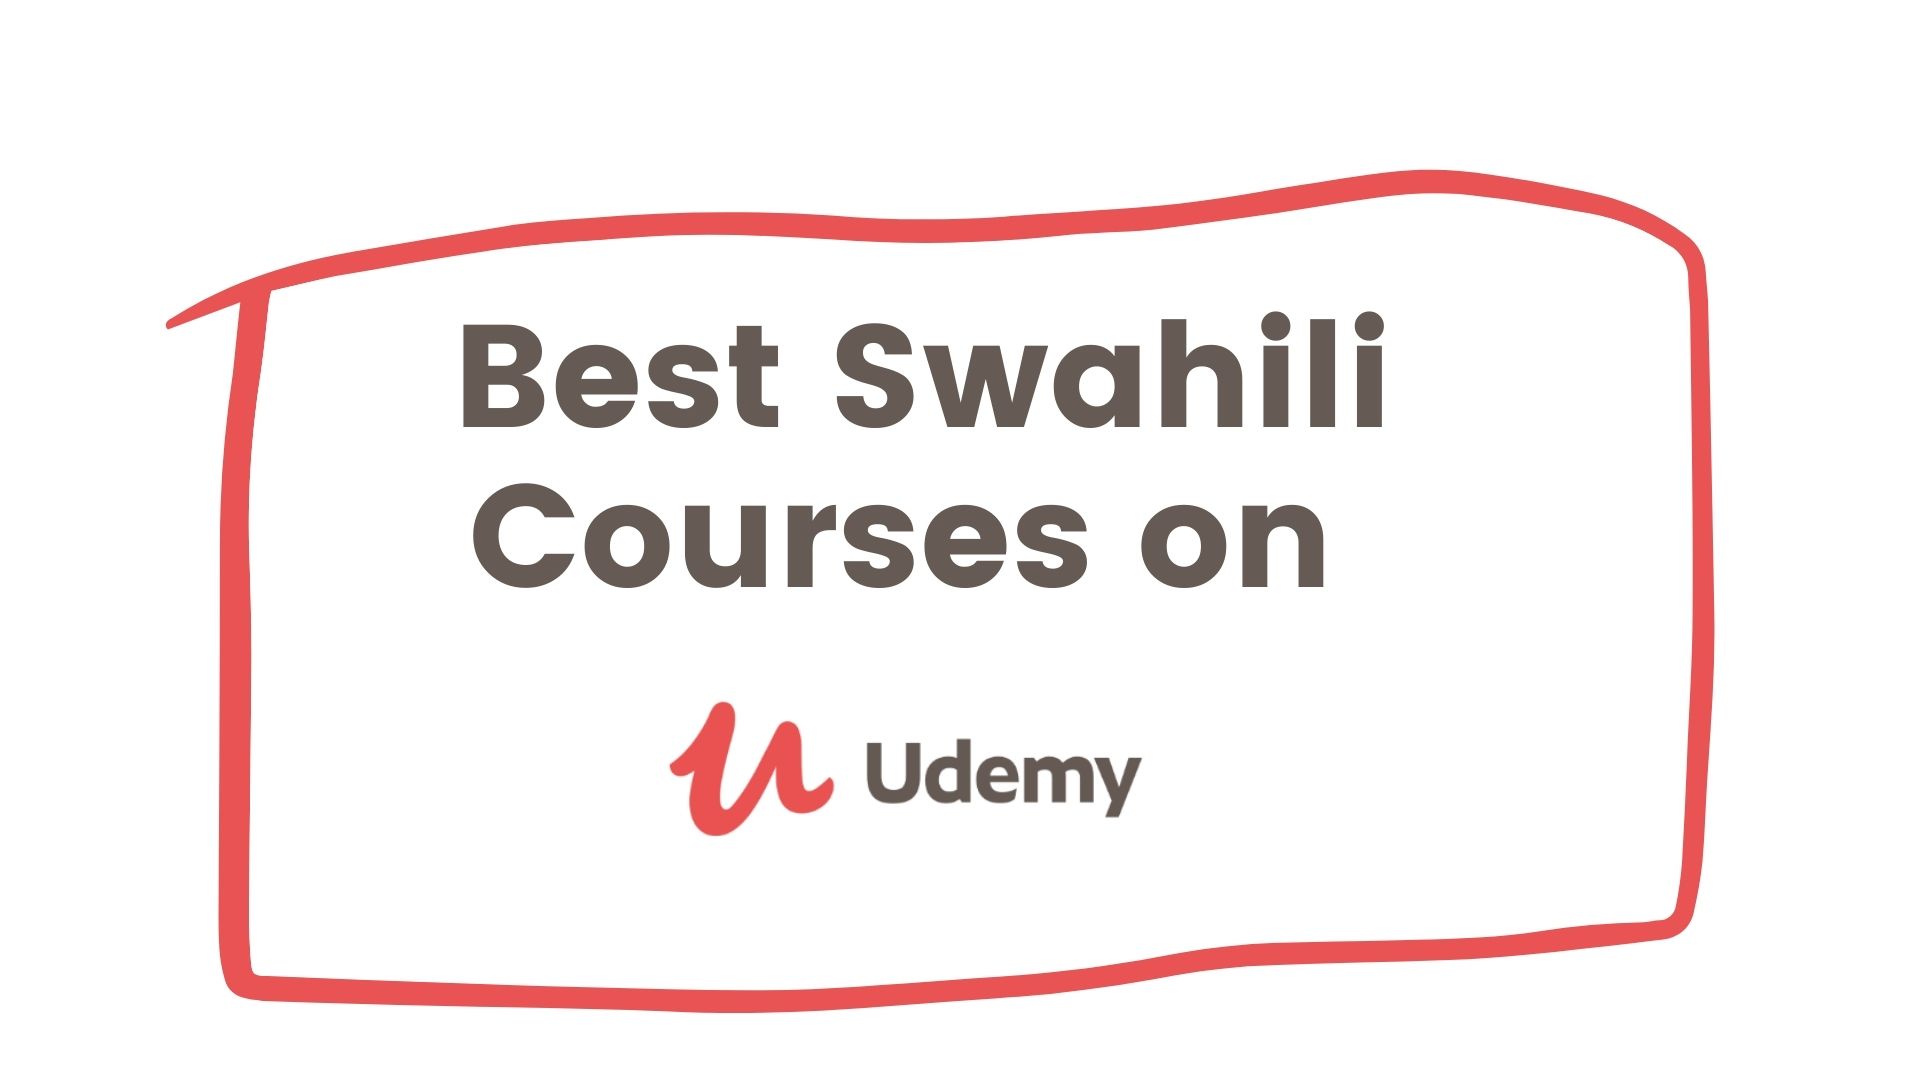 Top 25 Best Swahili Courses on Udemy